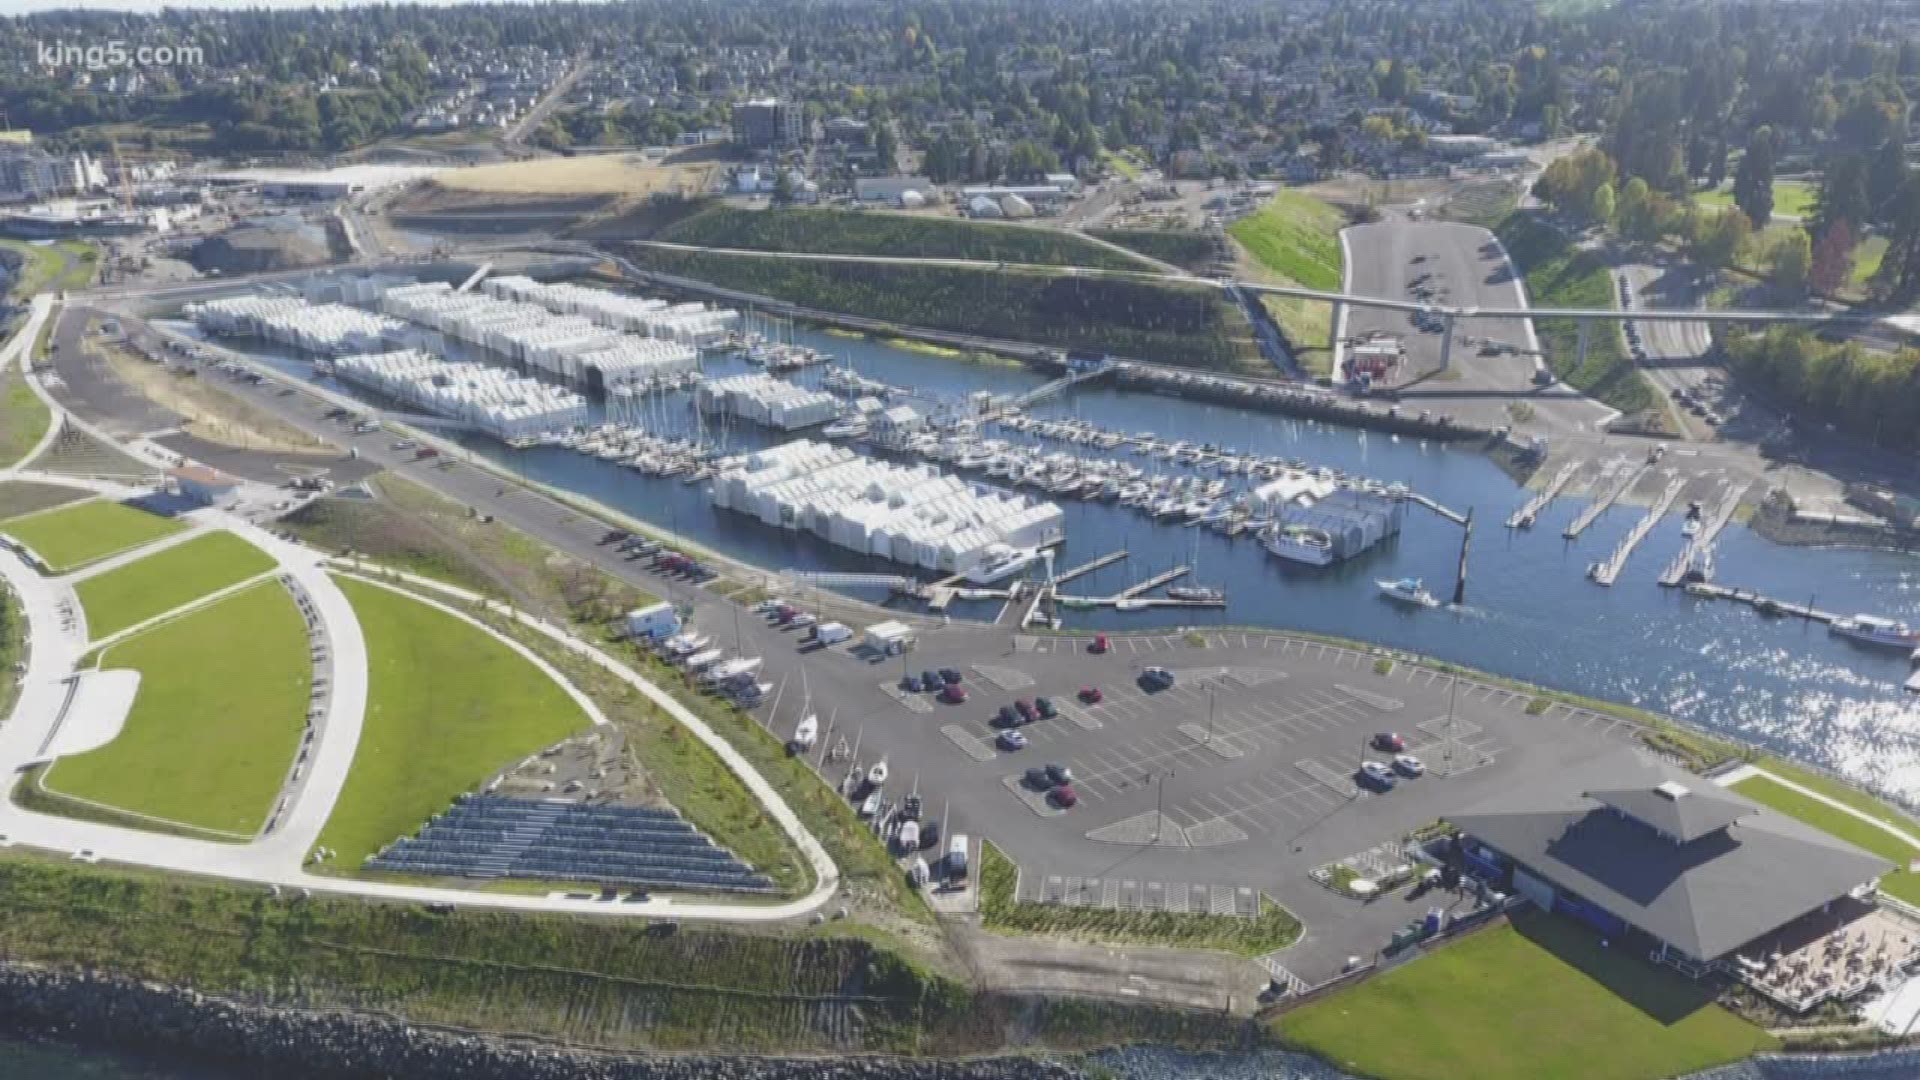 The new mega park at Point Defiance is giving Tacoma's waterfront a facelift.